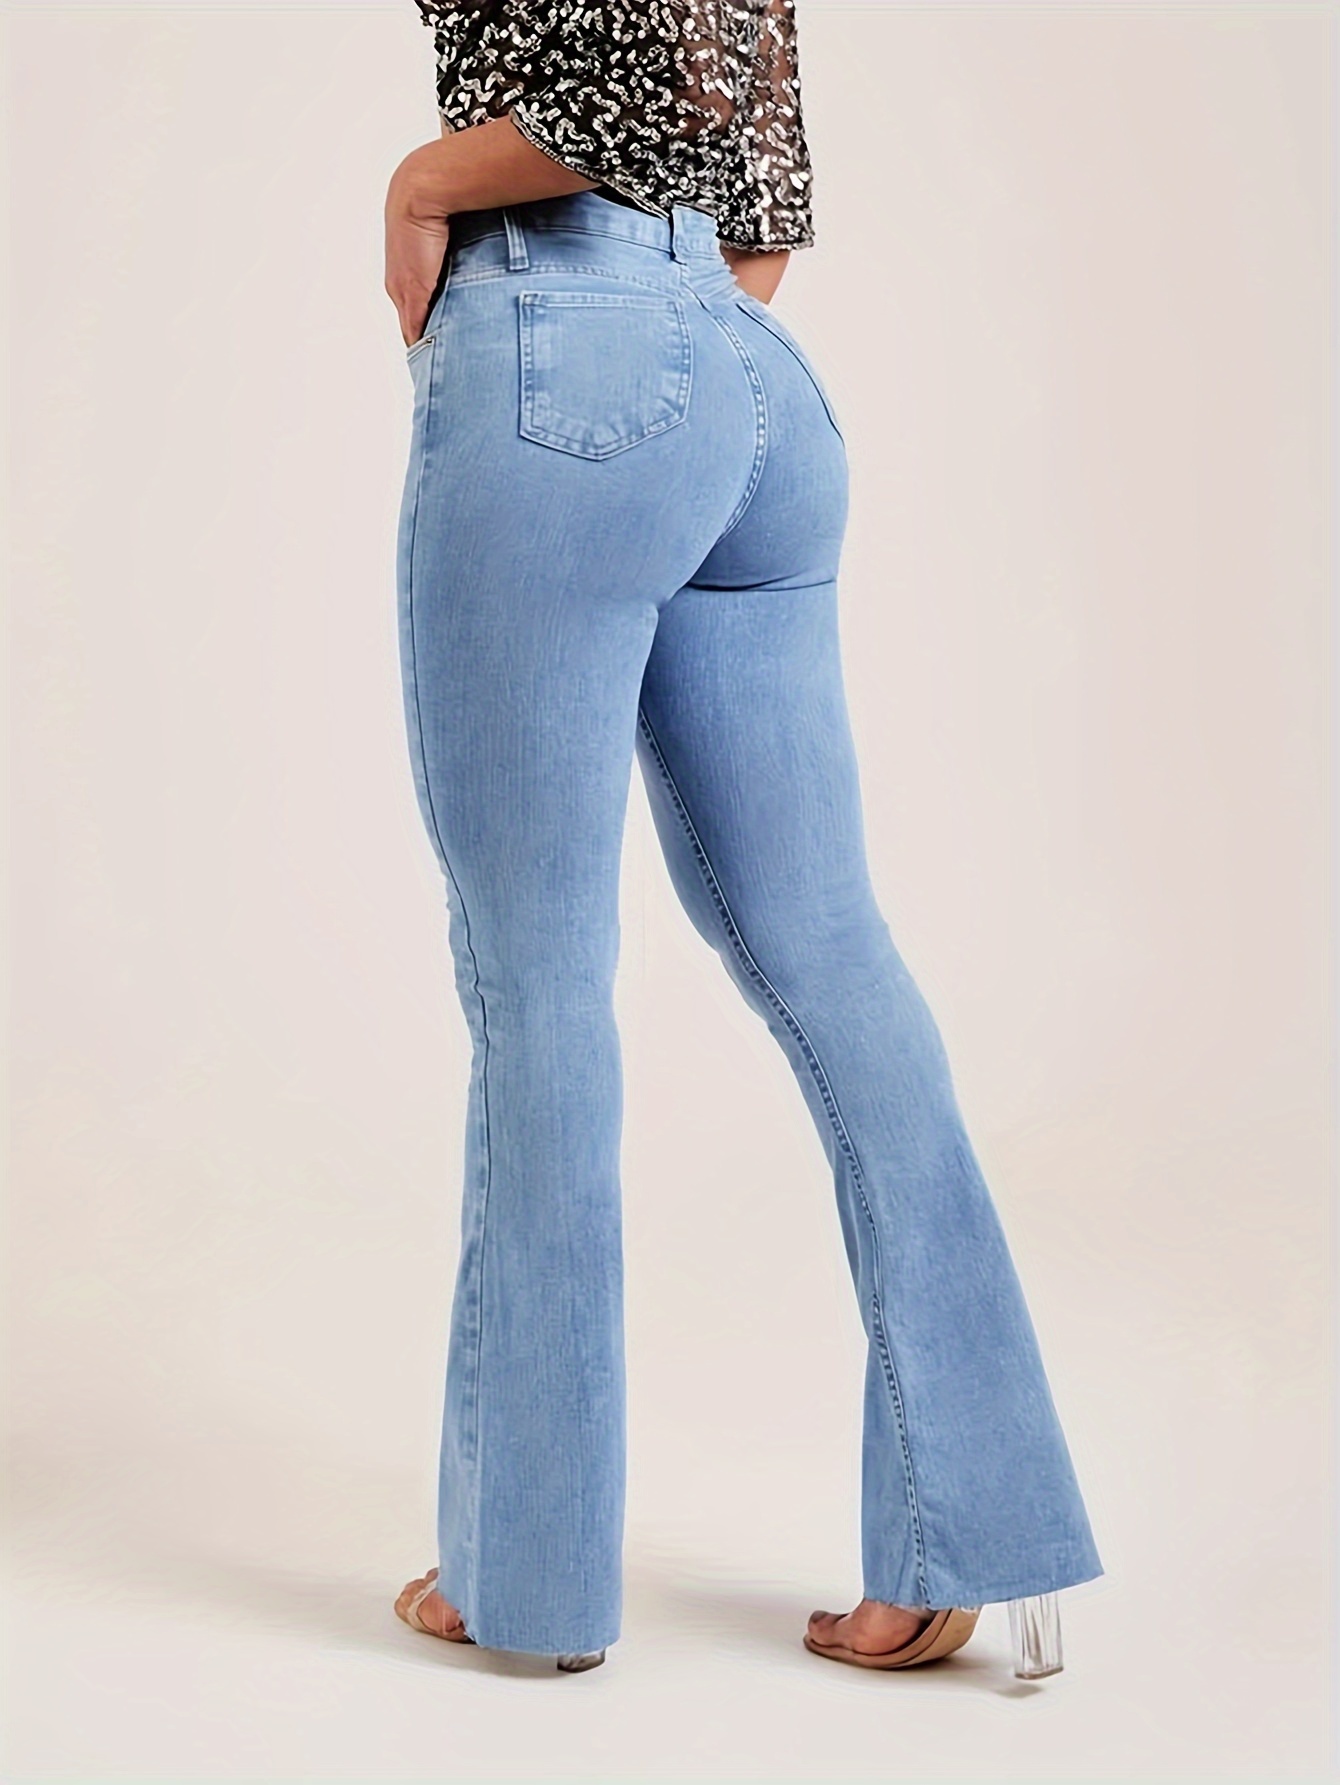 Jeans for Women Skinny Classic High Waisted Bell Bottom Pants